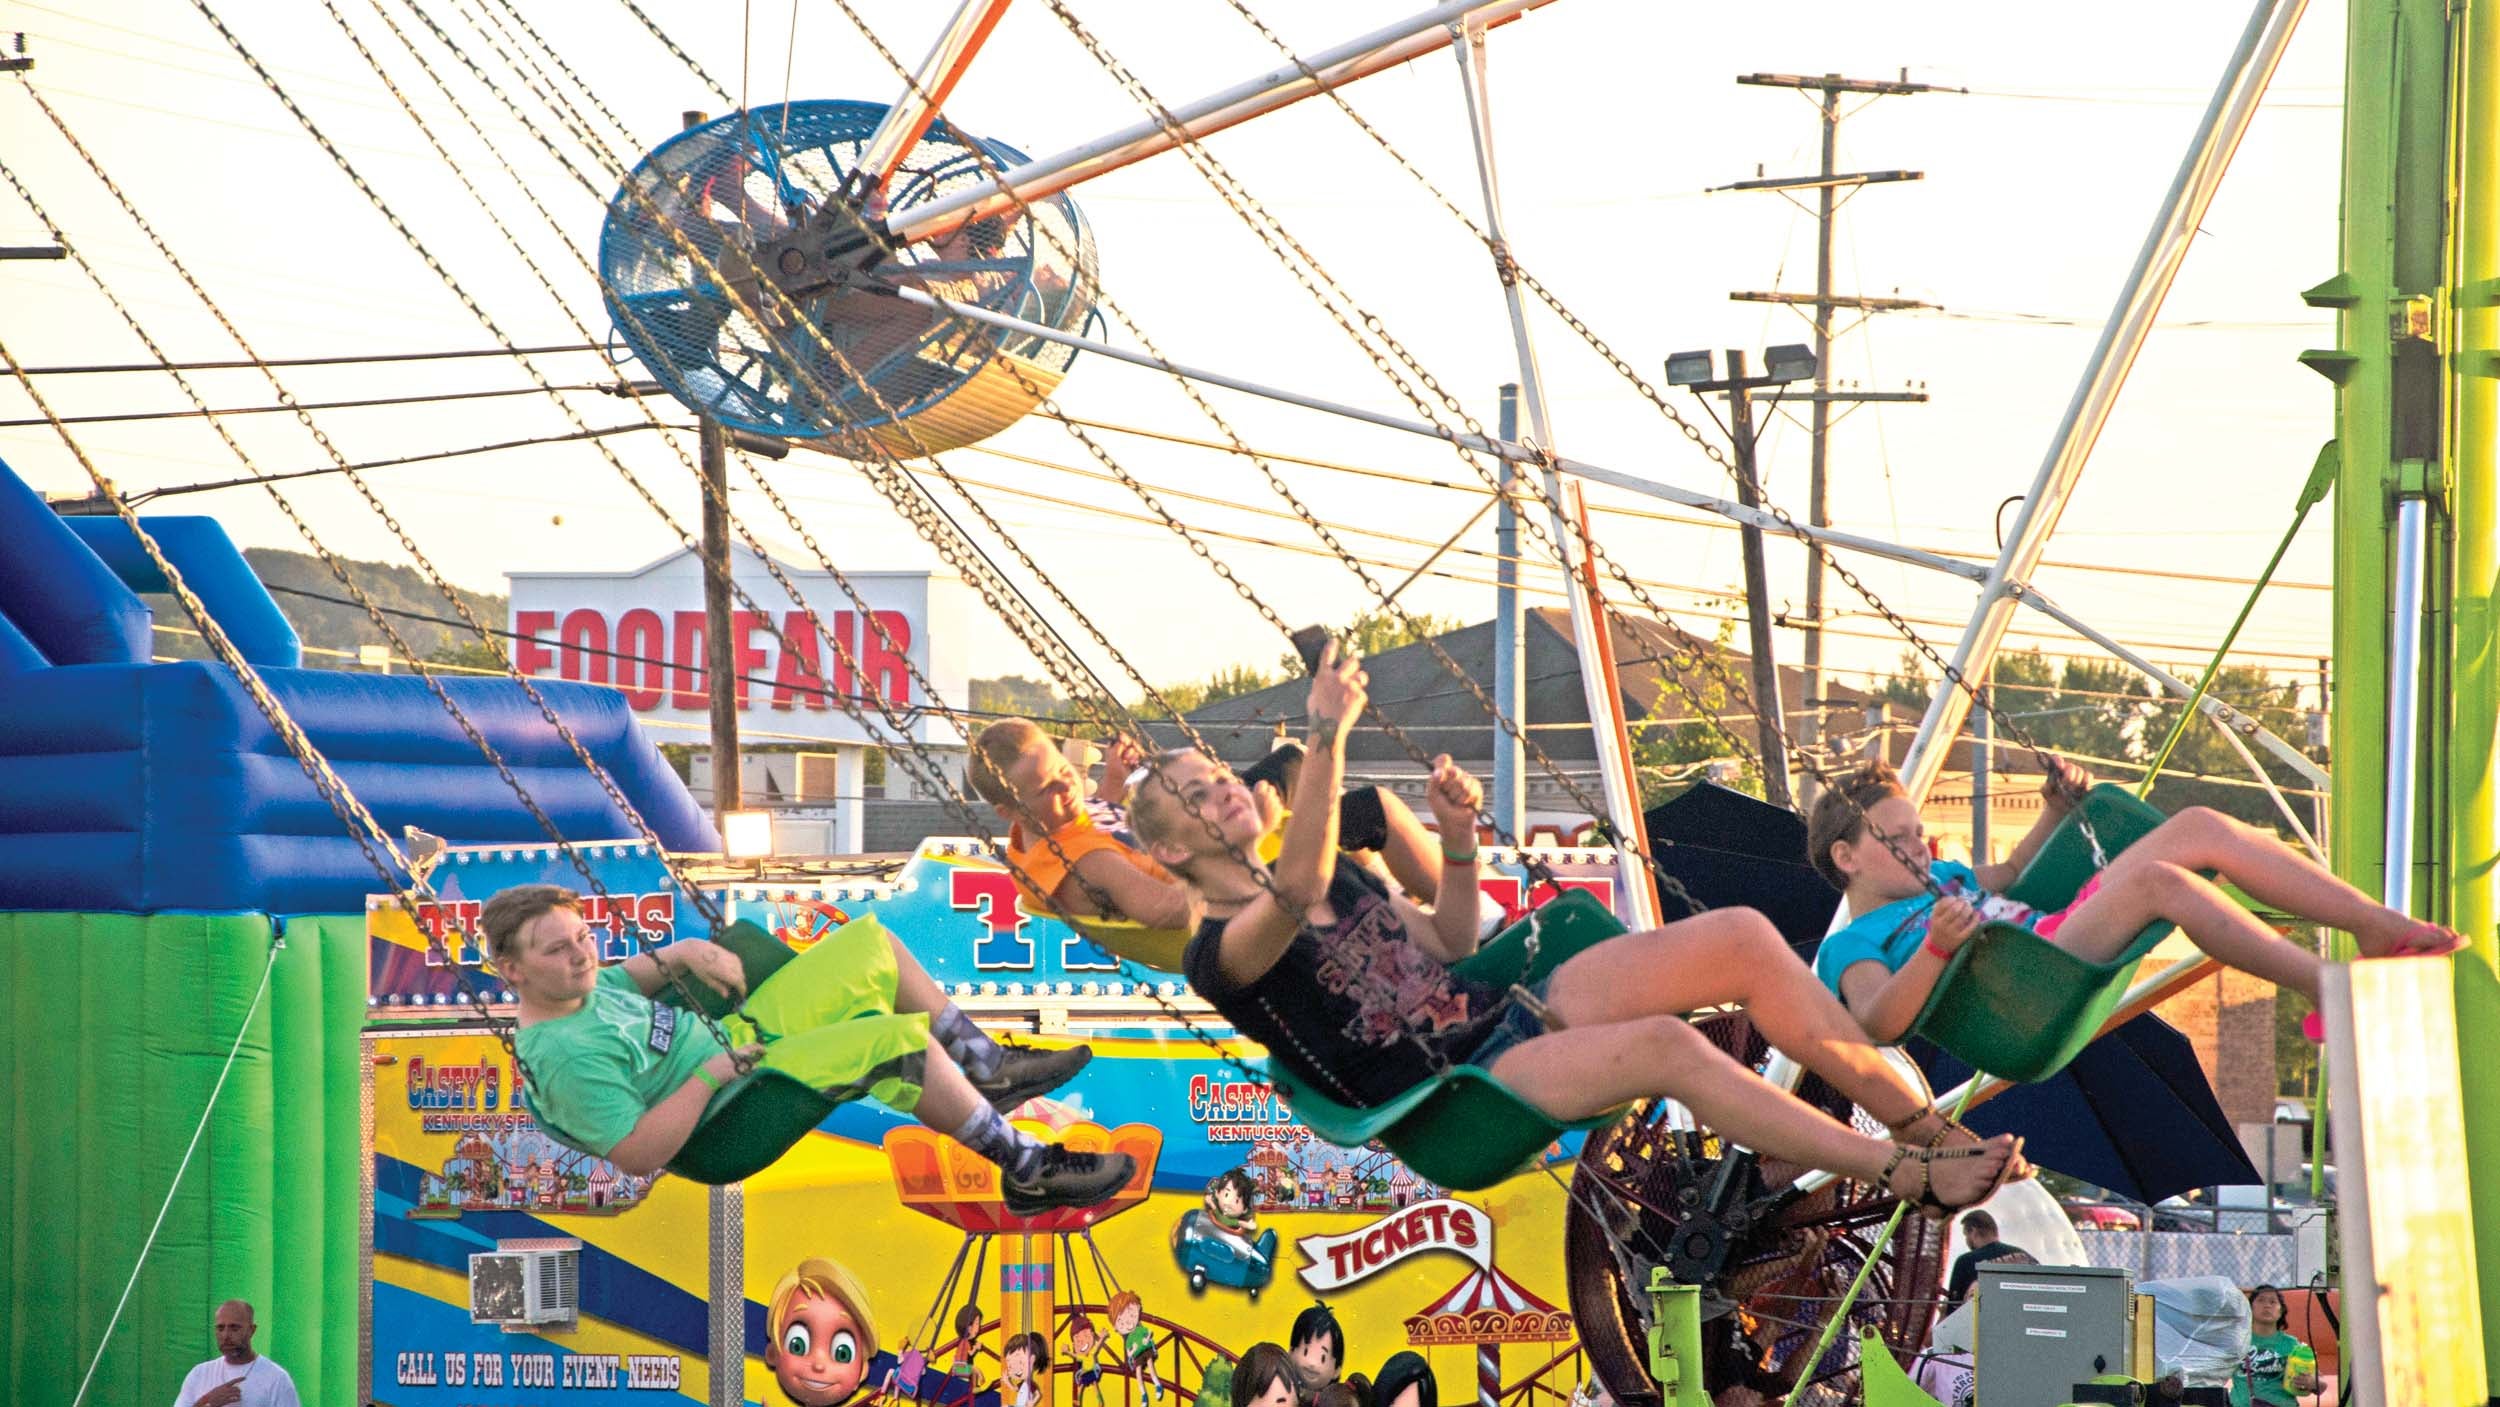 Lawrence County Fair begins today The Tribune The Tribune